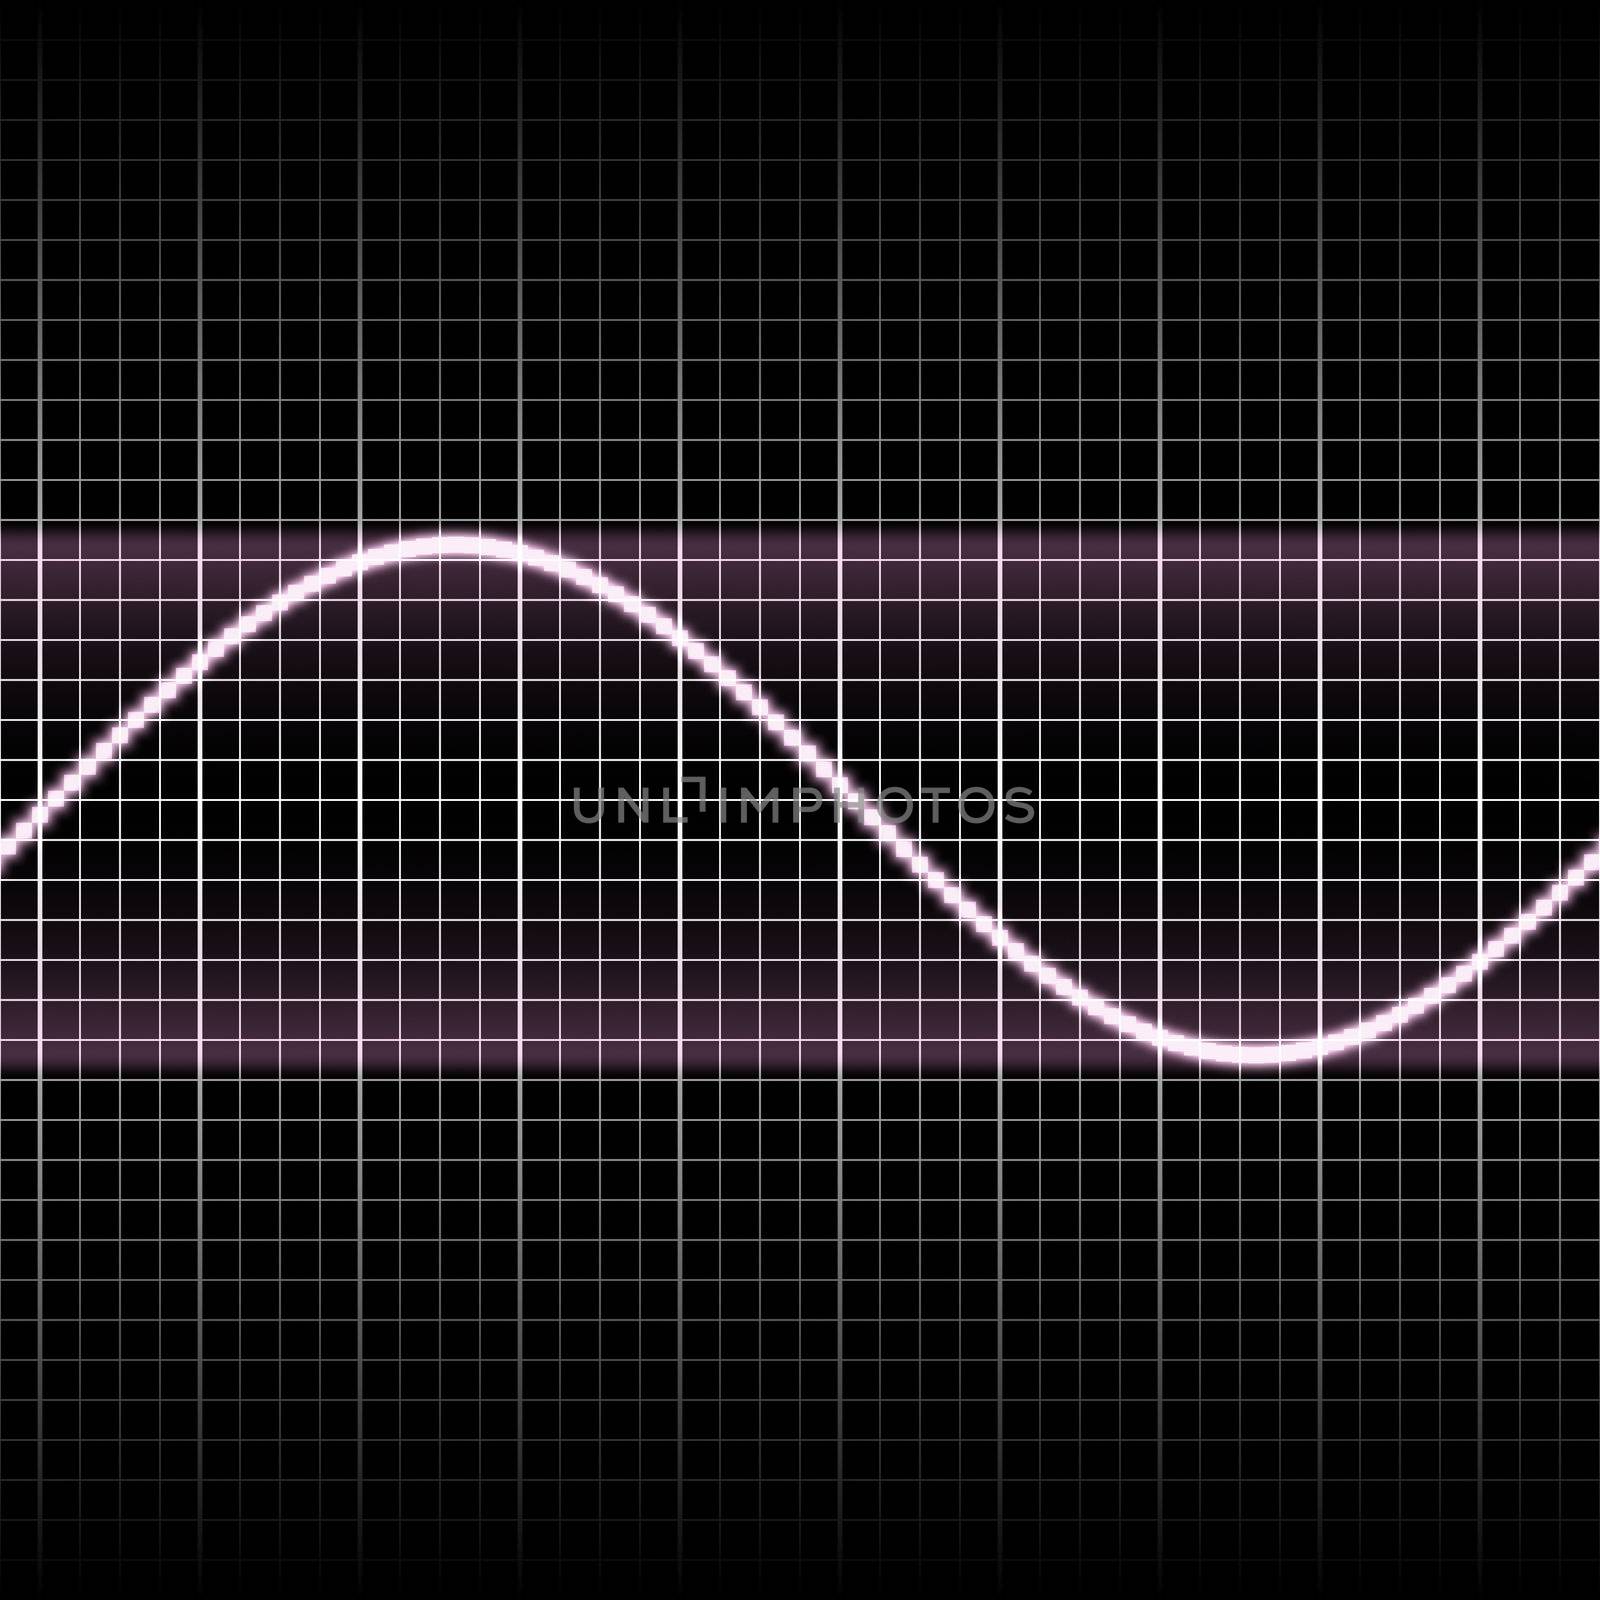 digitally created sound wave pattern, seamlessly tillable

